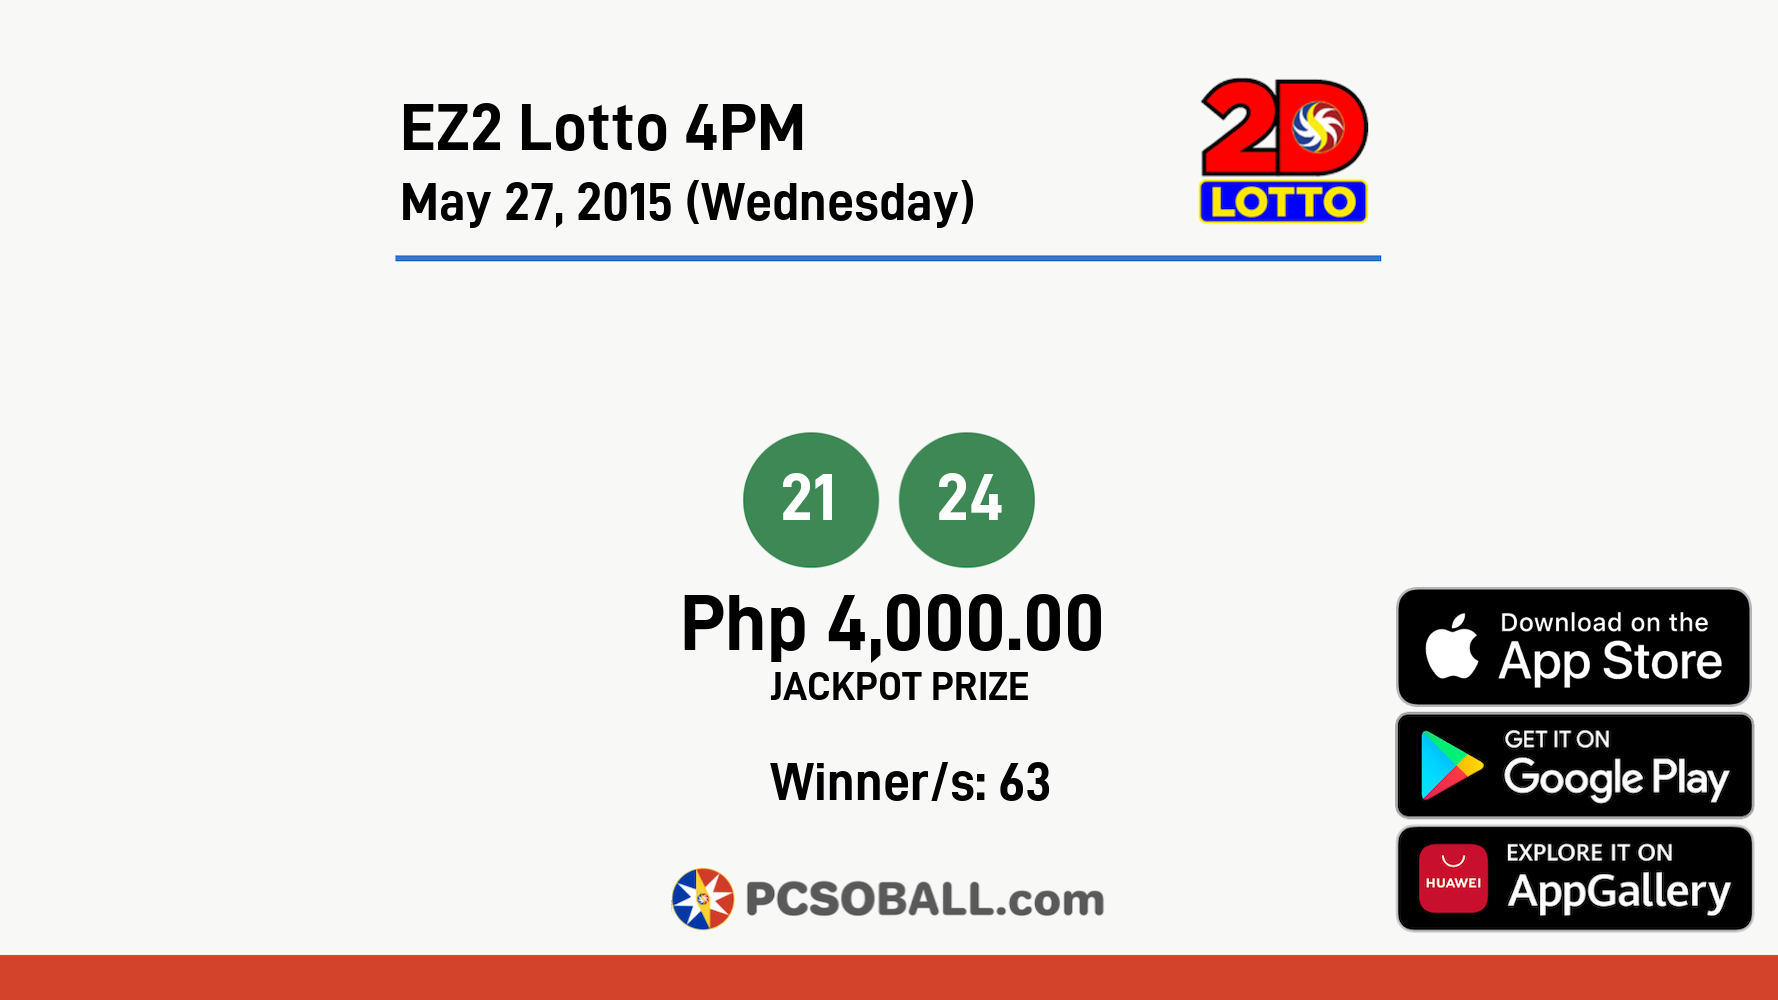 EZ2 Lotto 4PM May 27, 2015 (Wednesday) Result